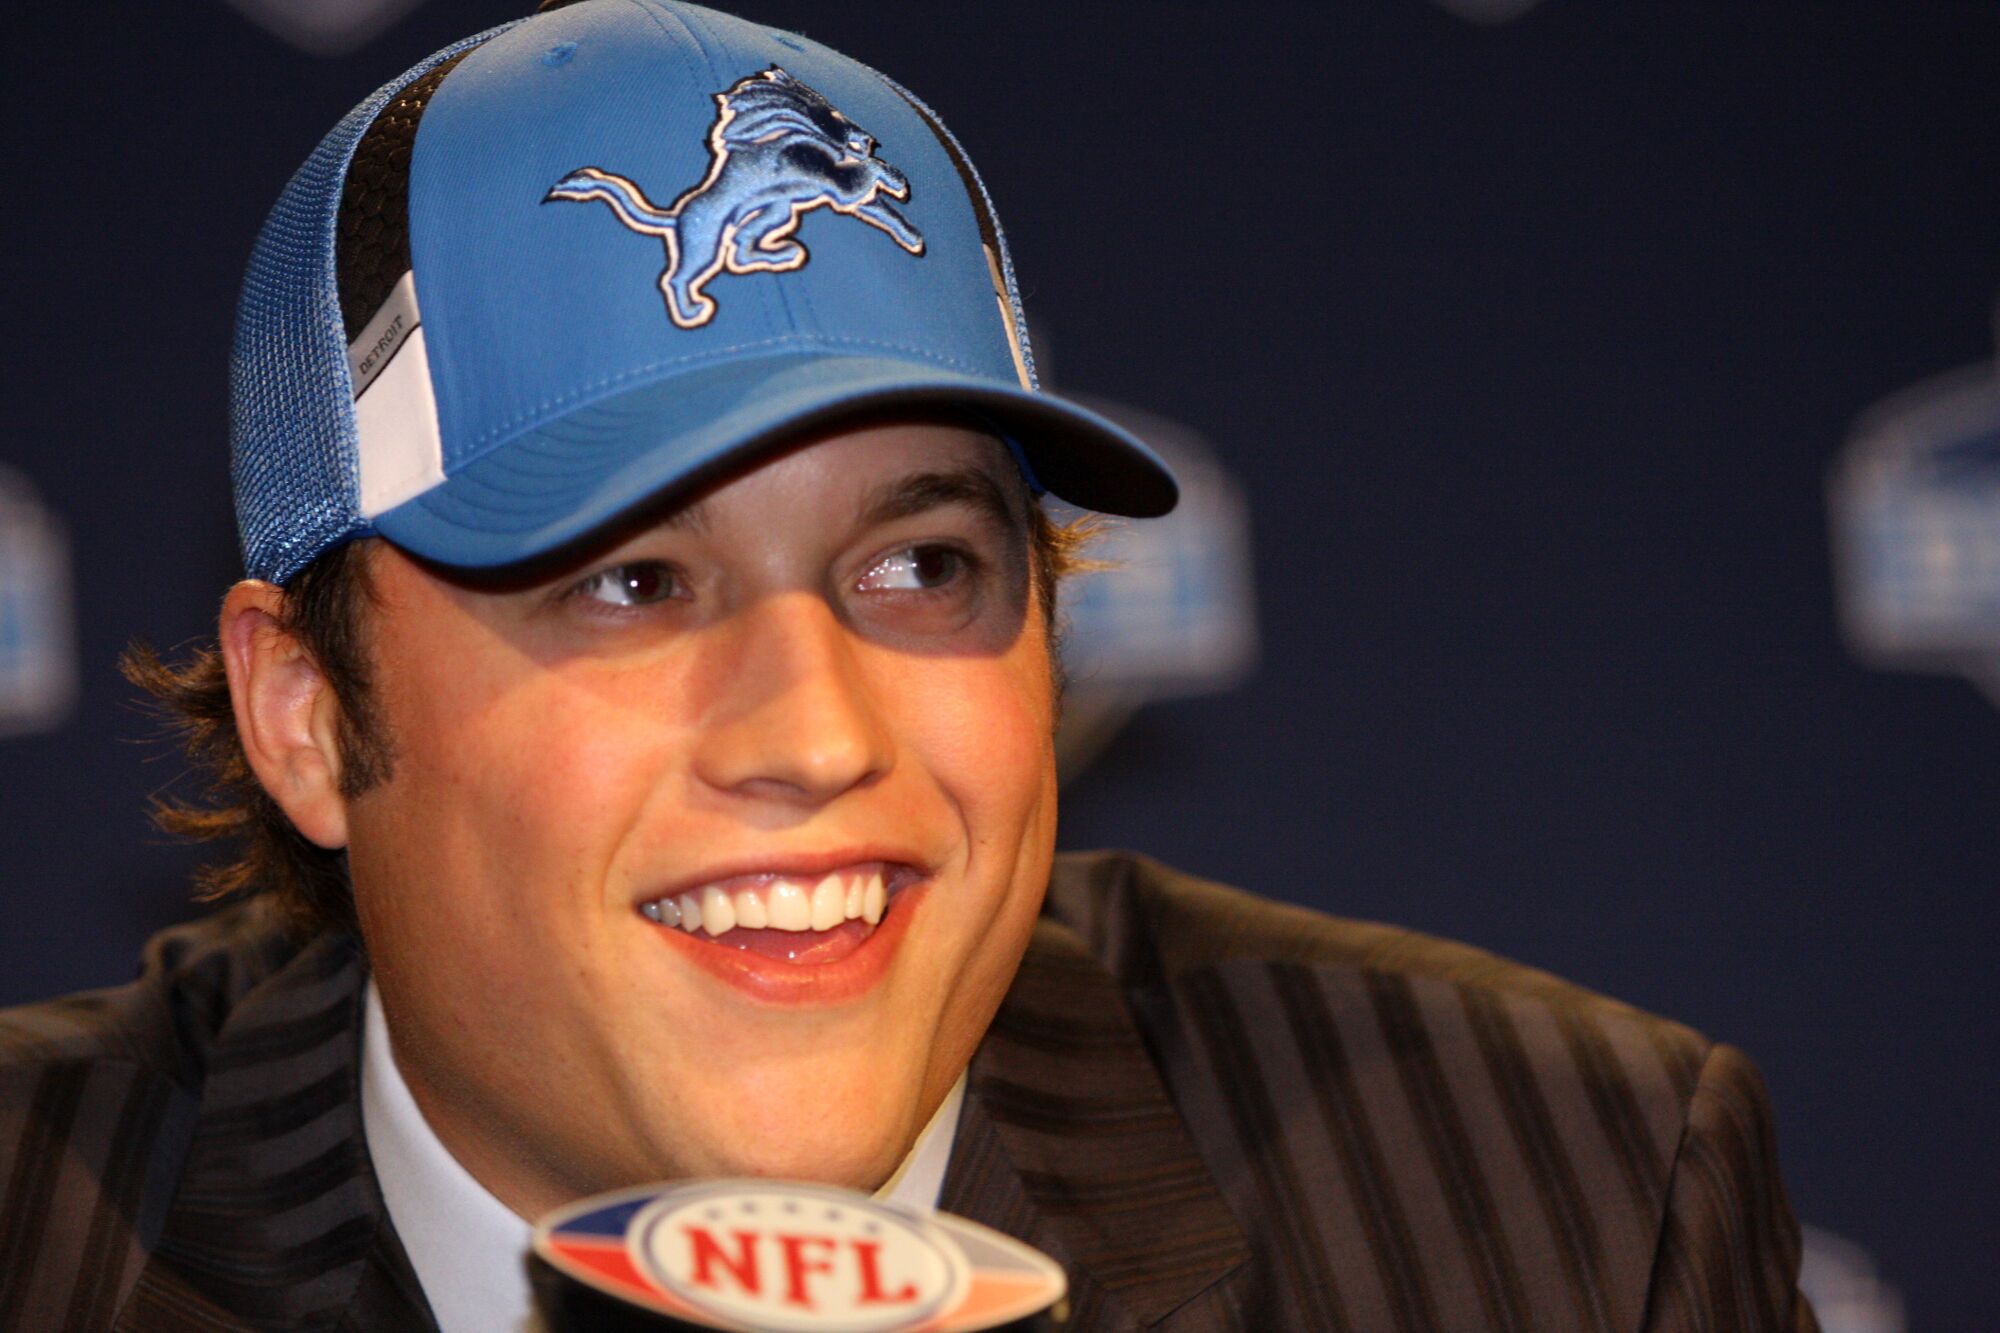 Matthew Stafford speaks to reporters after being selected No. 1 overall by the Detroit Lions in the 2009 NFL draft.